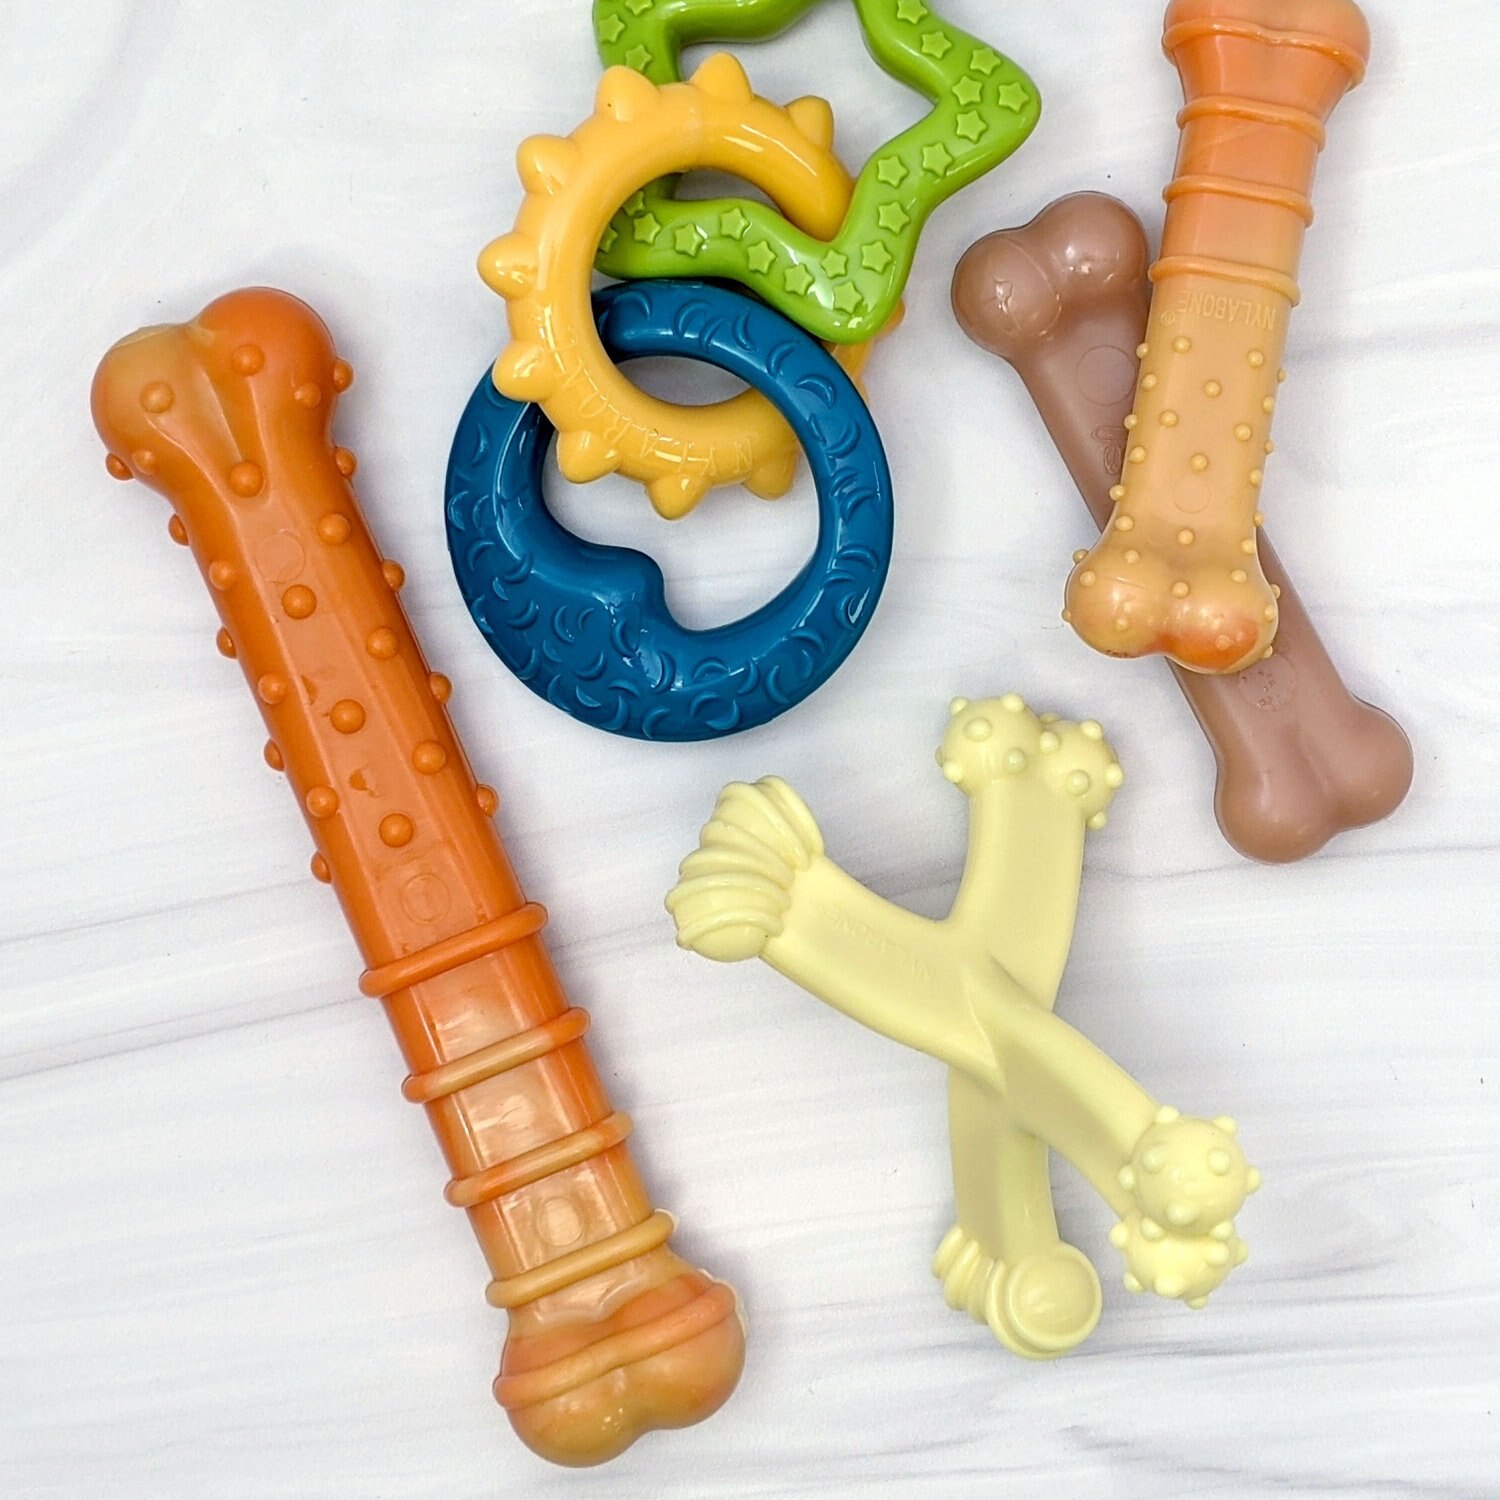 6 x 2.9 x 3 Inches Nylabone Puppy Teething Rings Multi-colour